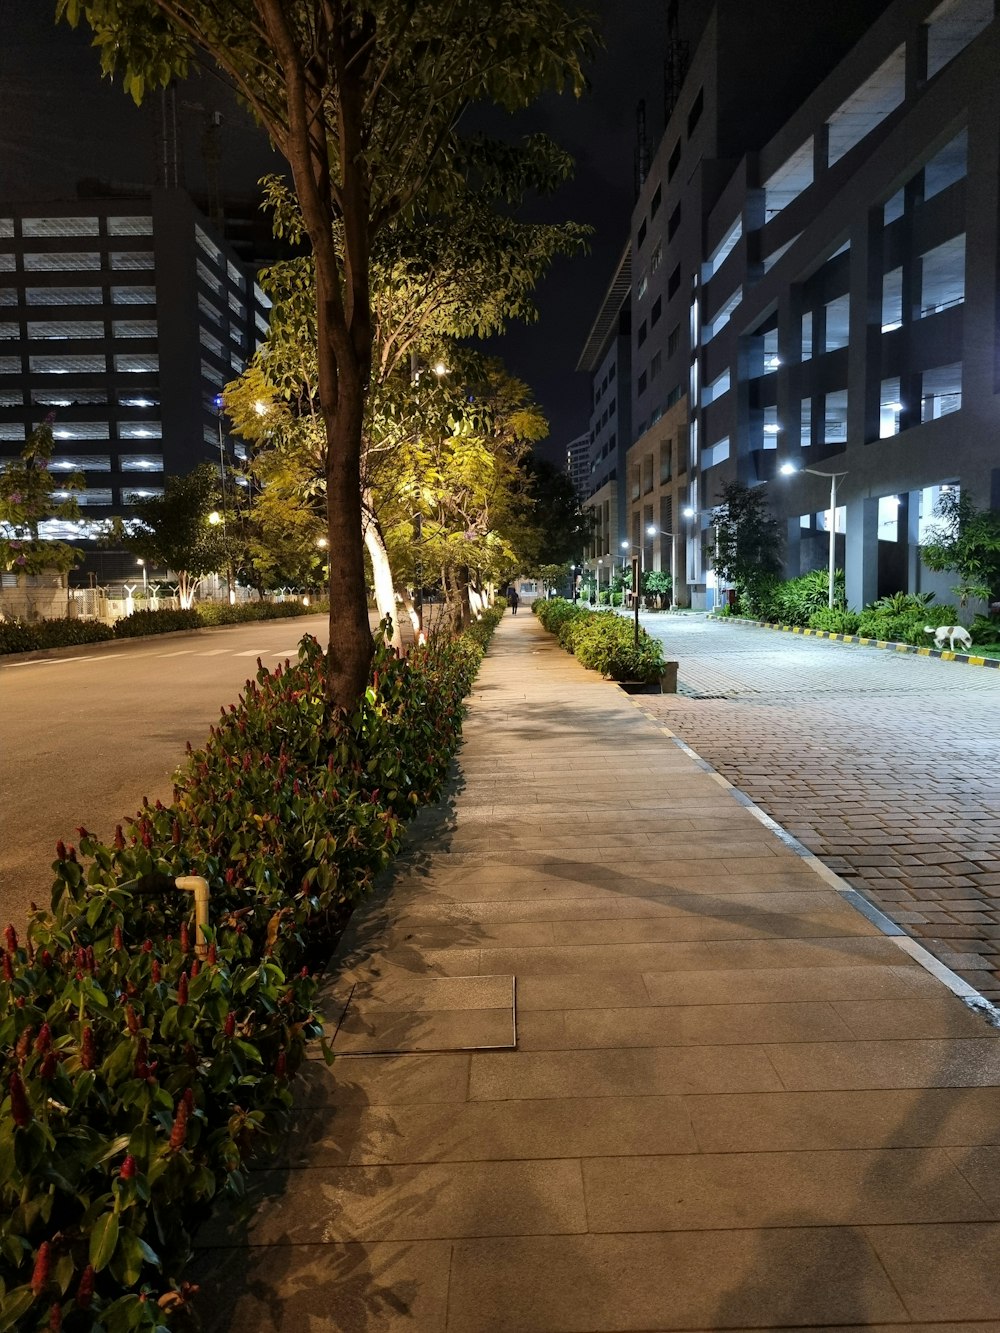 a city street at night with a row of trees